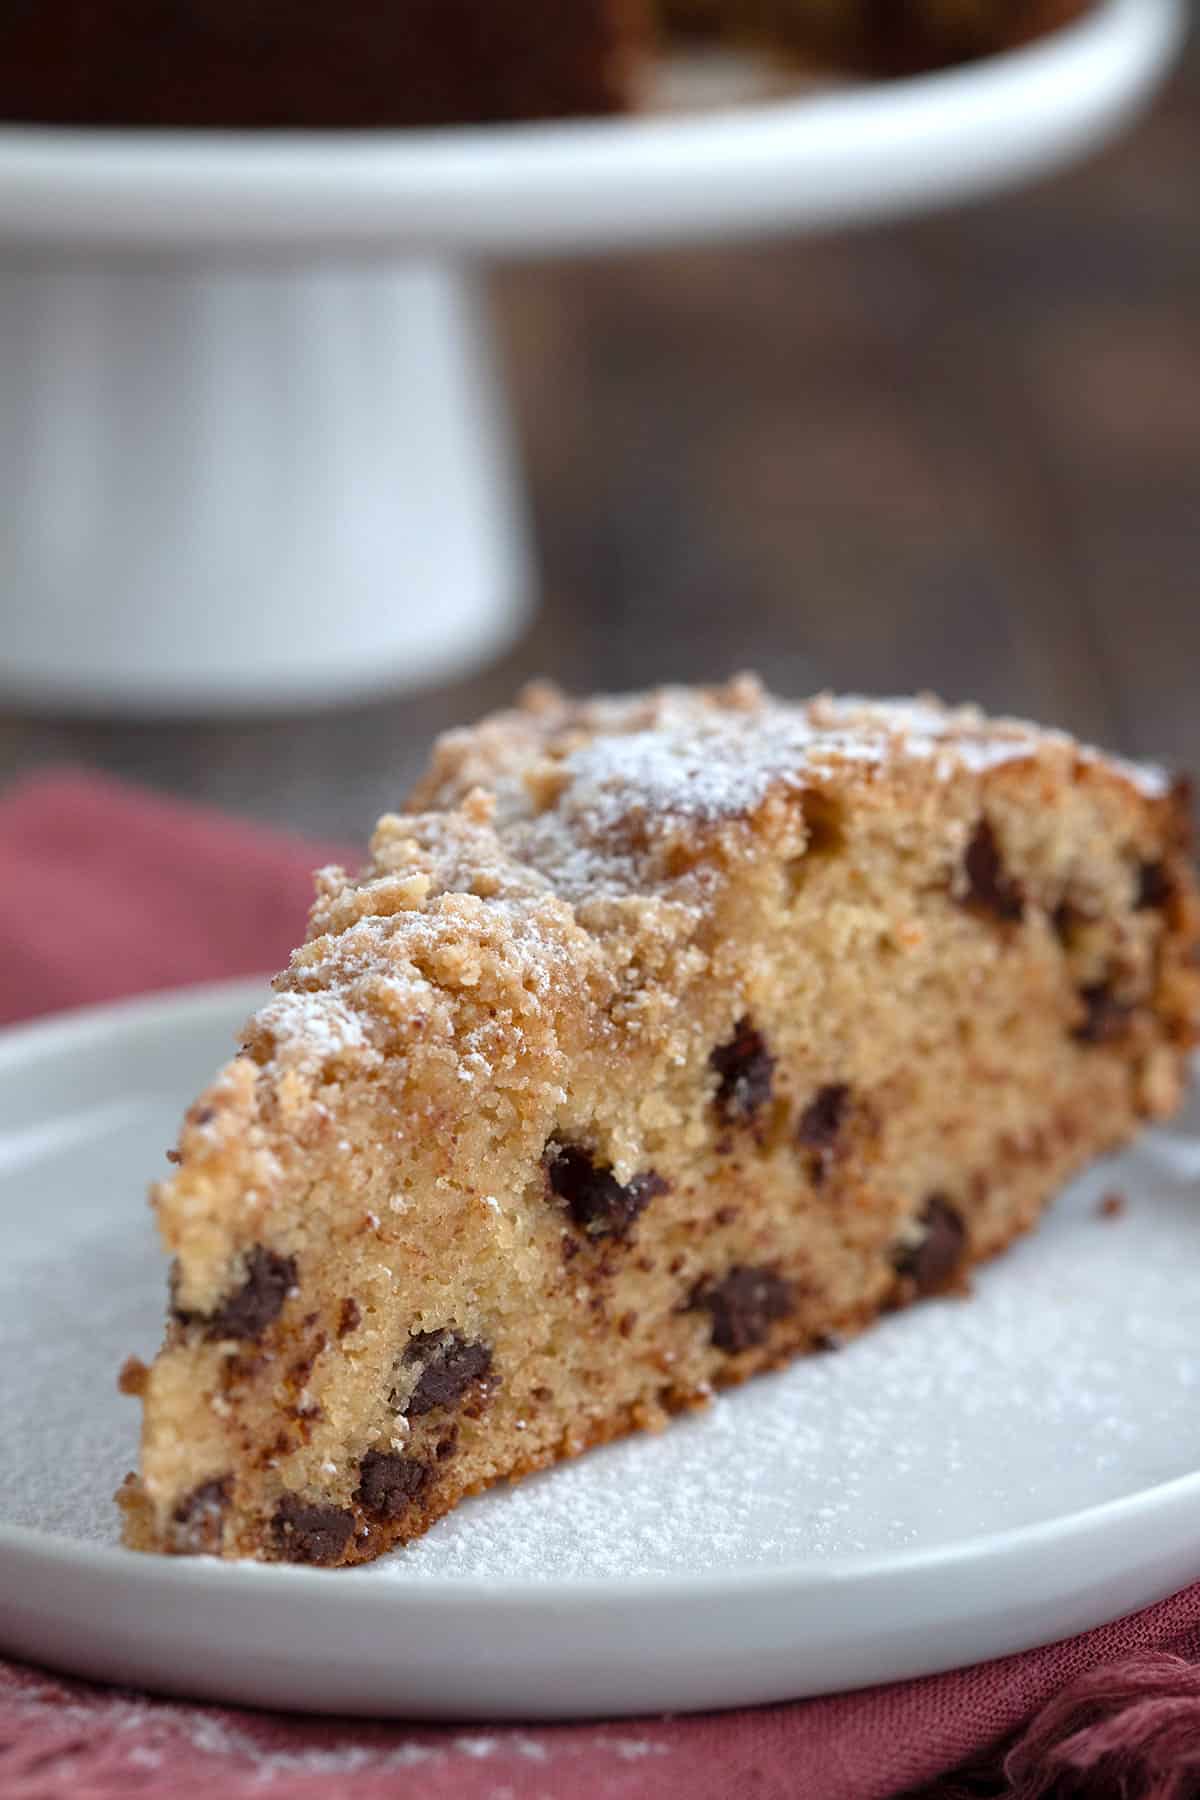 Close up shot of a slice of Keto Sour Cream Coffee Cake with chocolate chips.